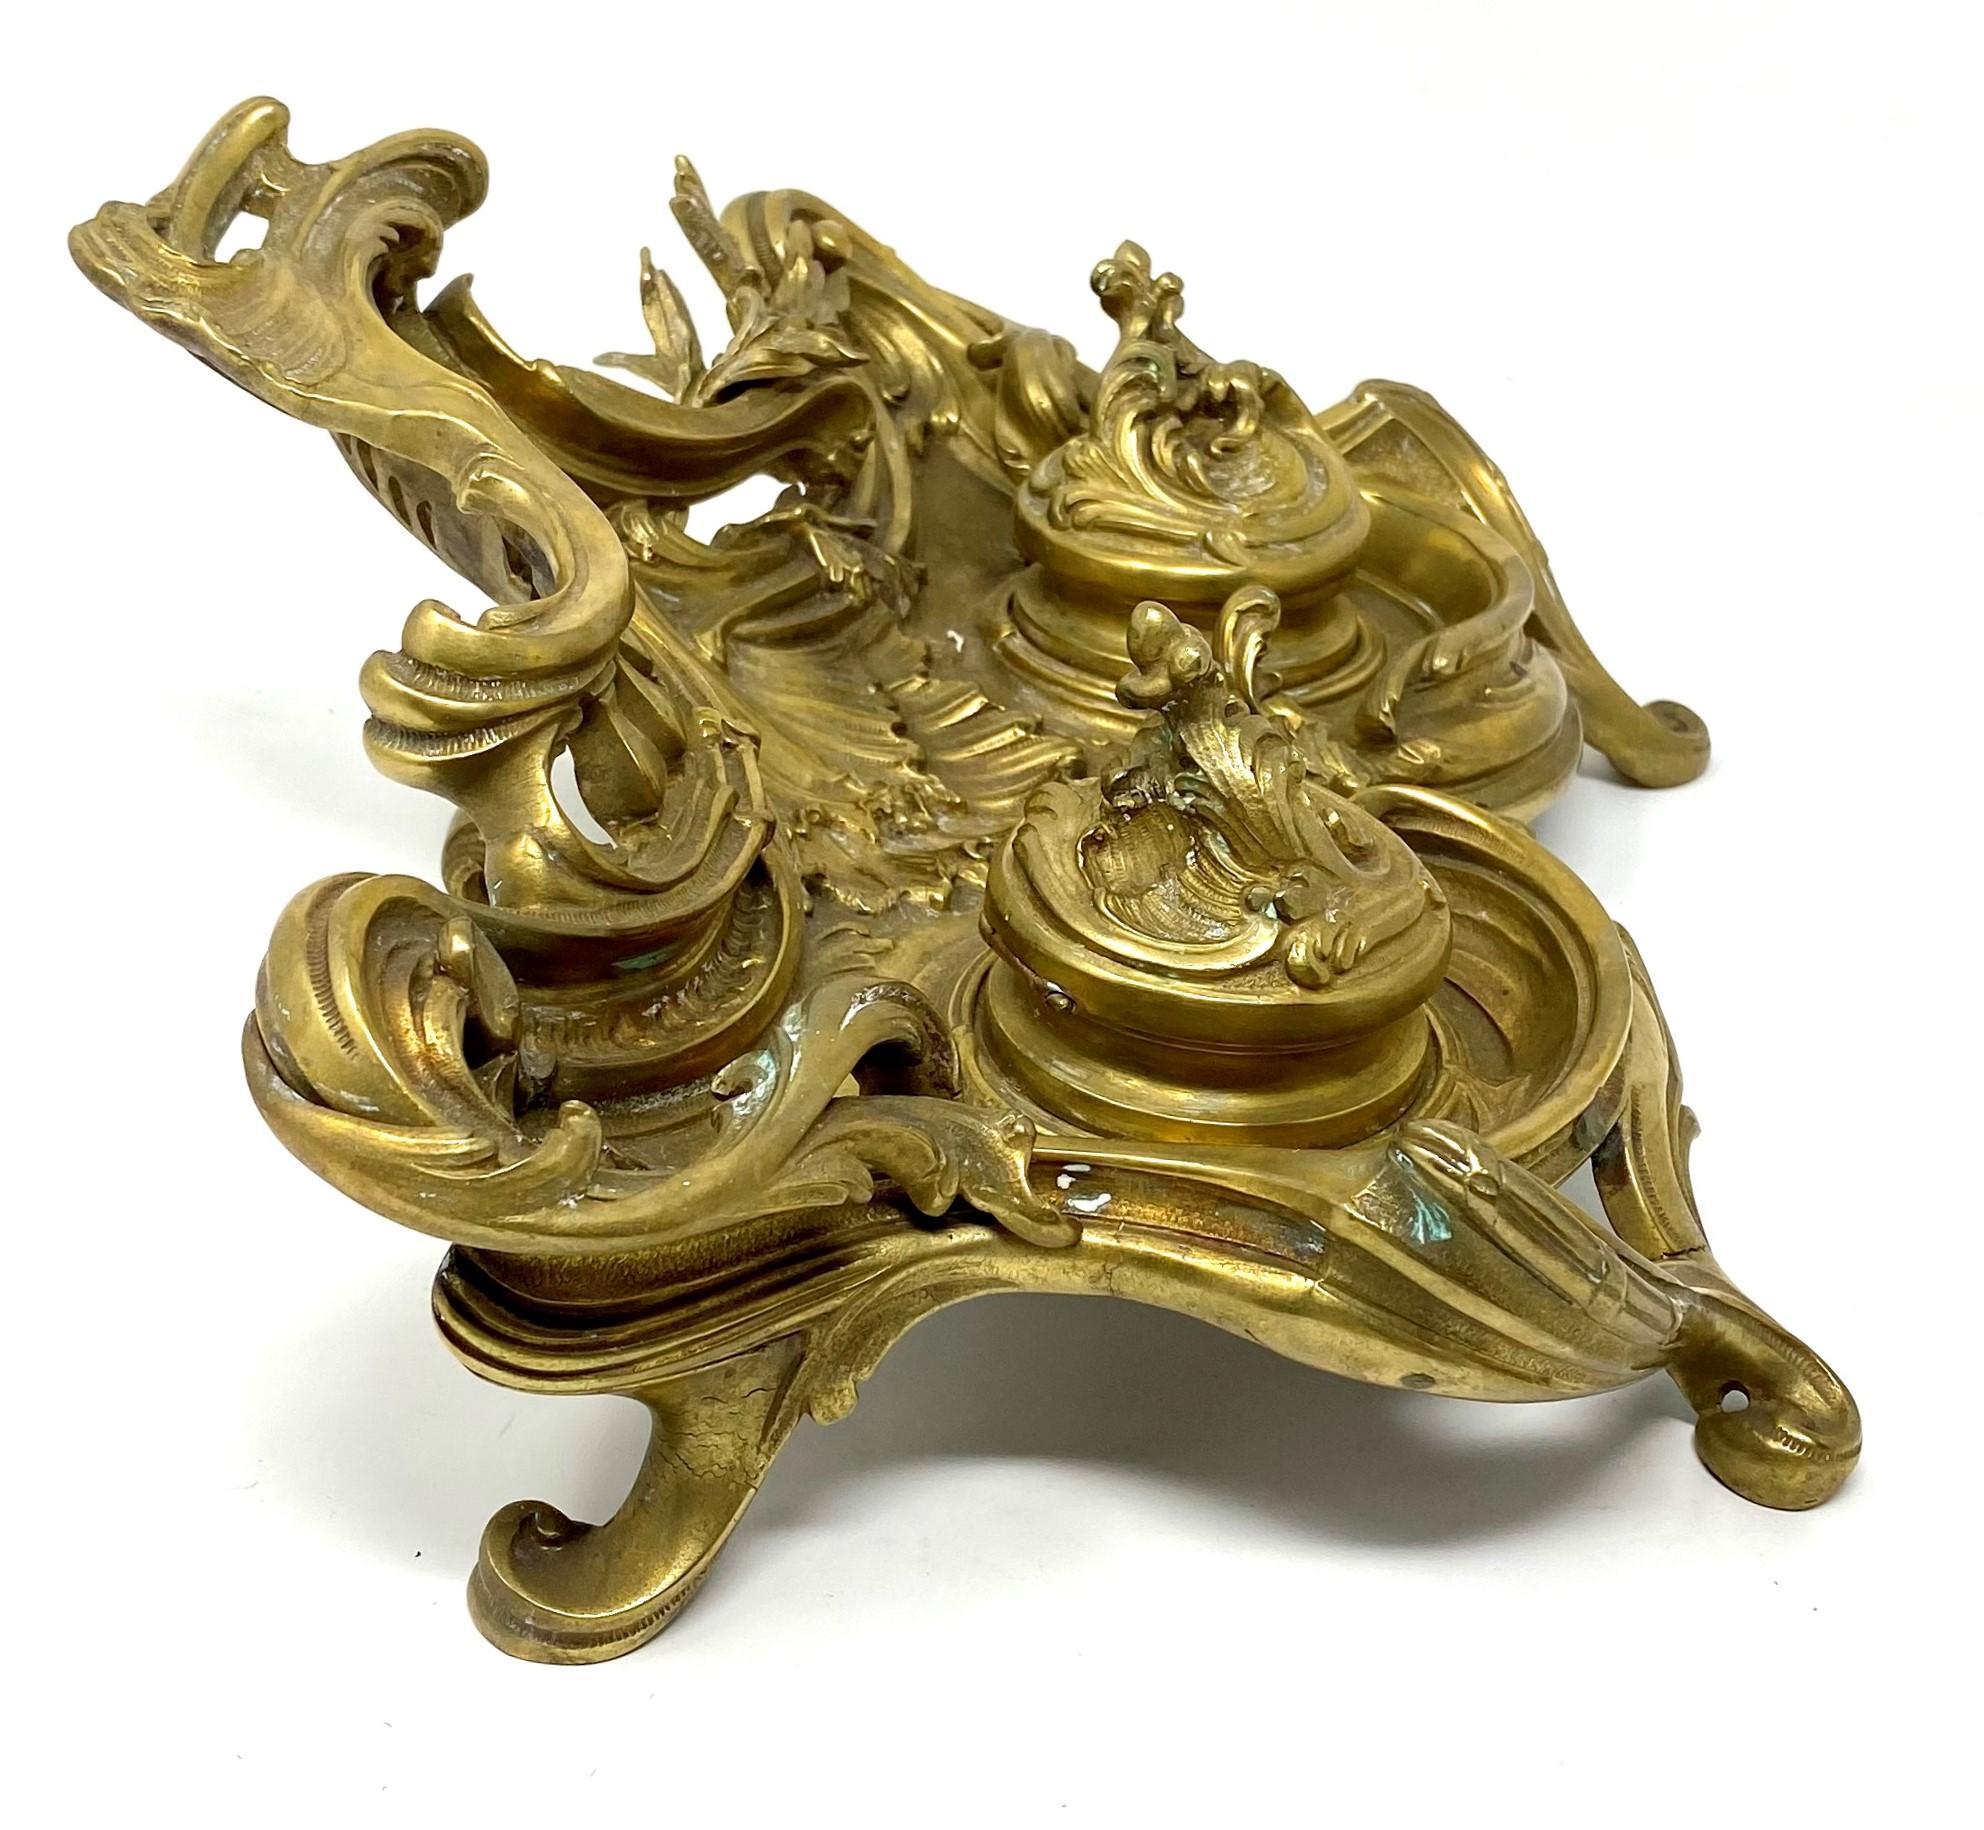 Antique French gold bronze Louis XV style inkwell, circa 1880-1890.